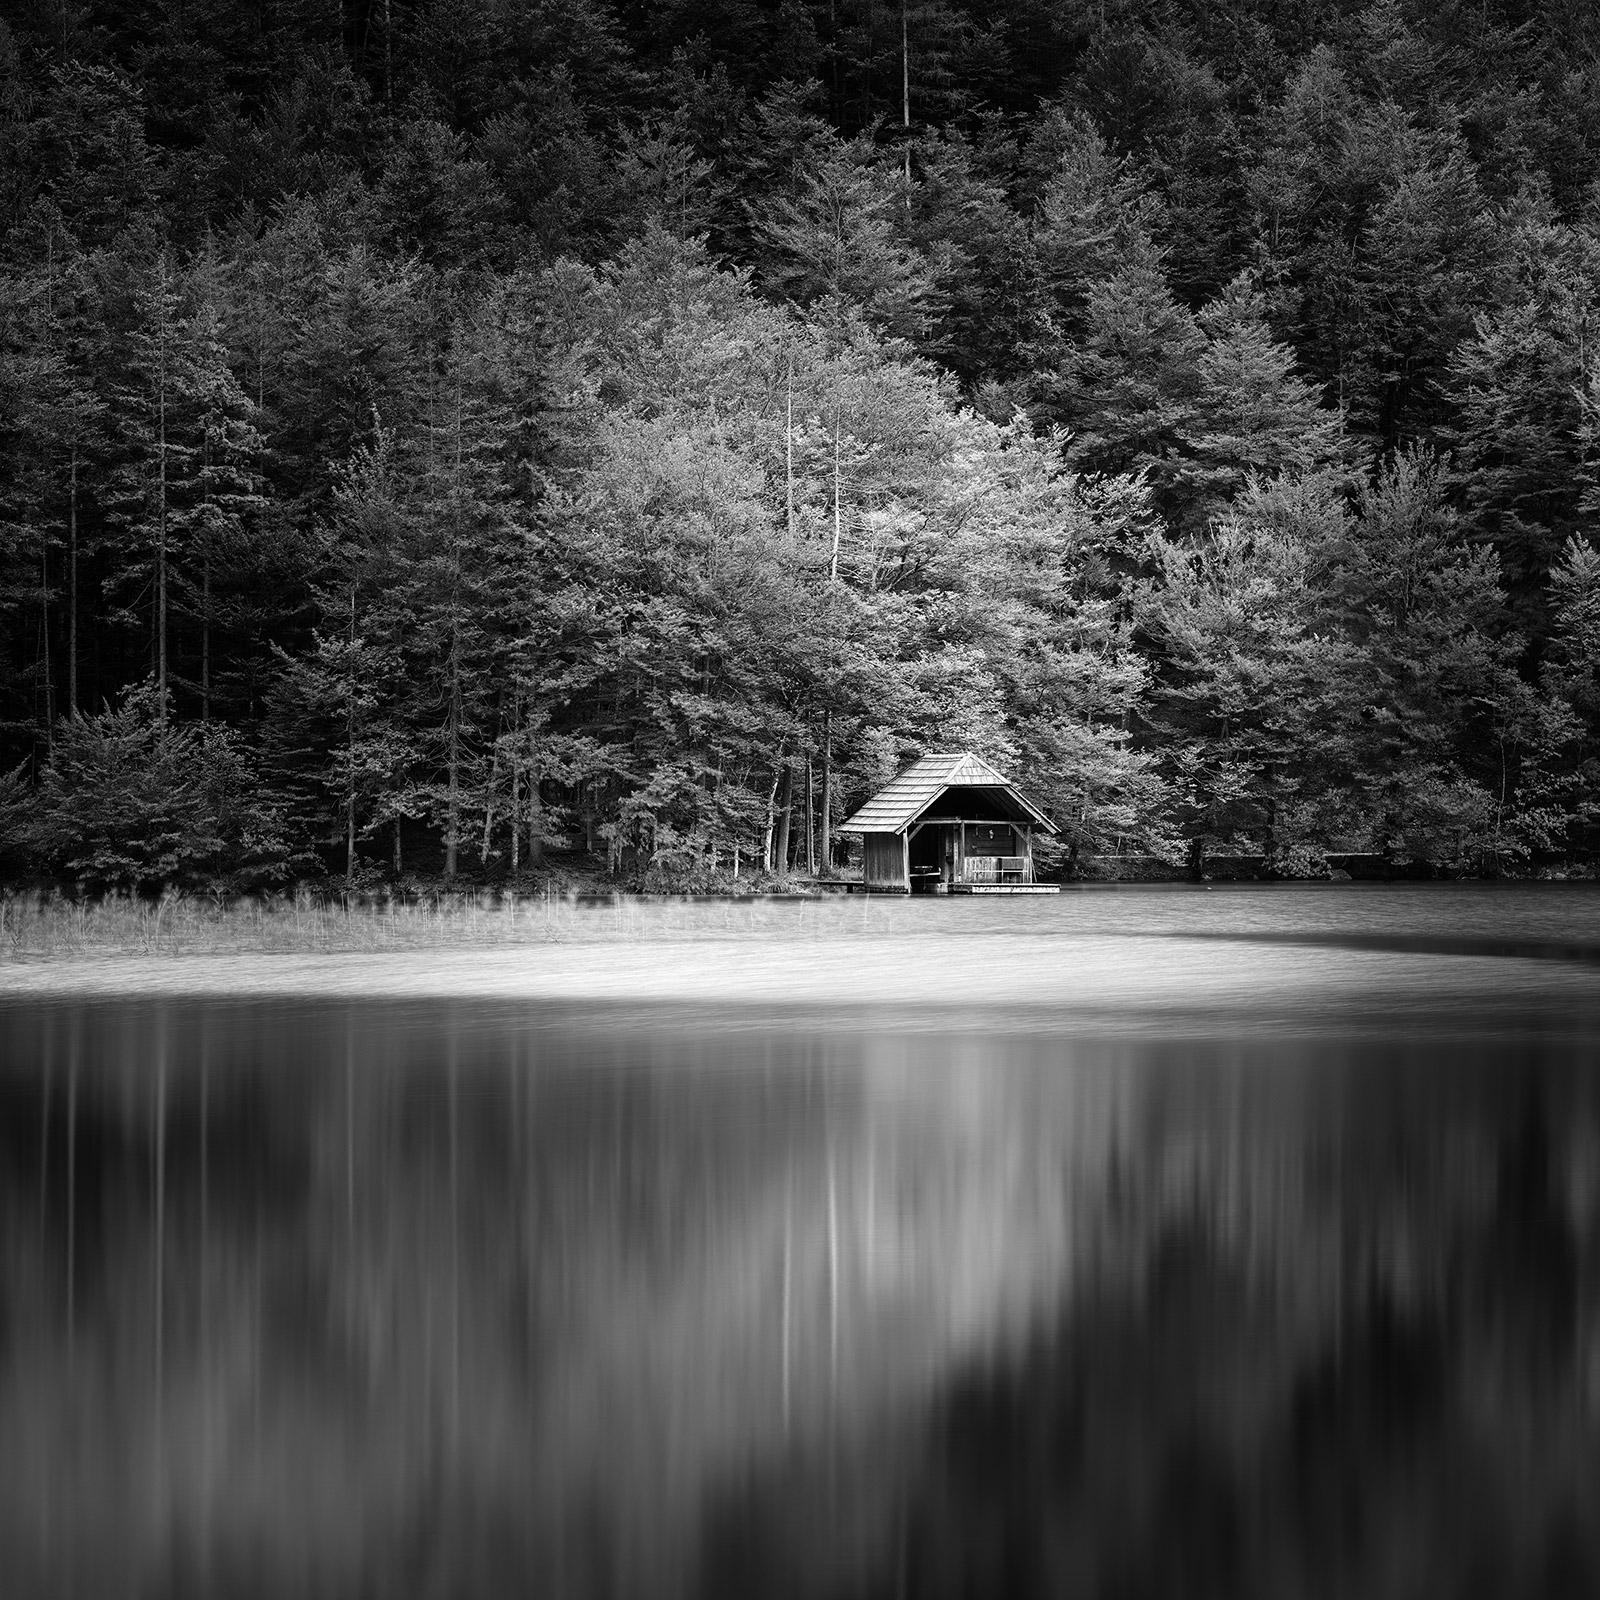 Wooden Boat House, black and white long exposure photography, fine art landscape